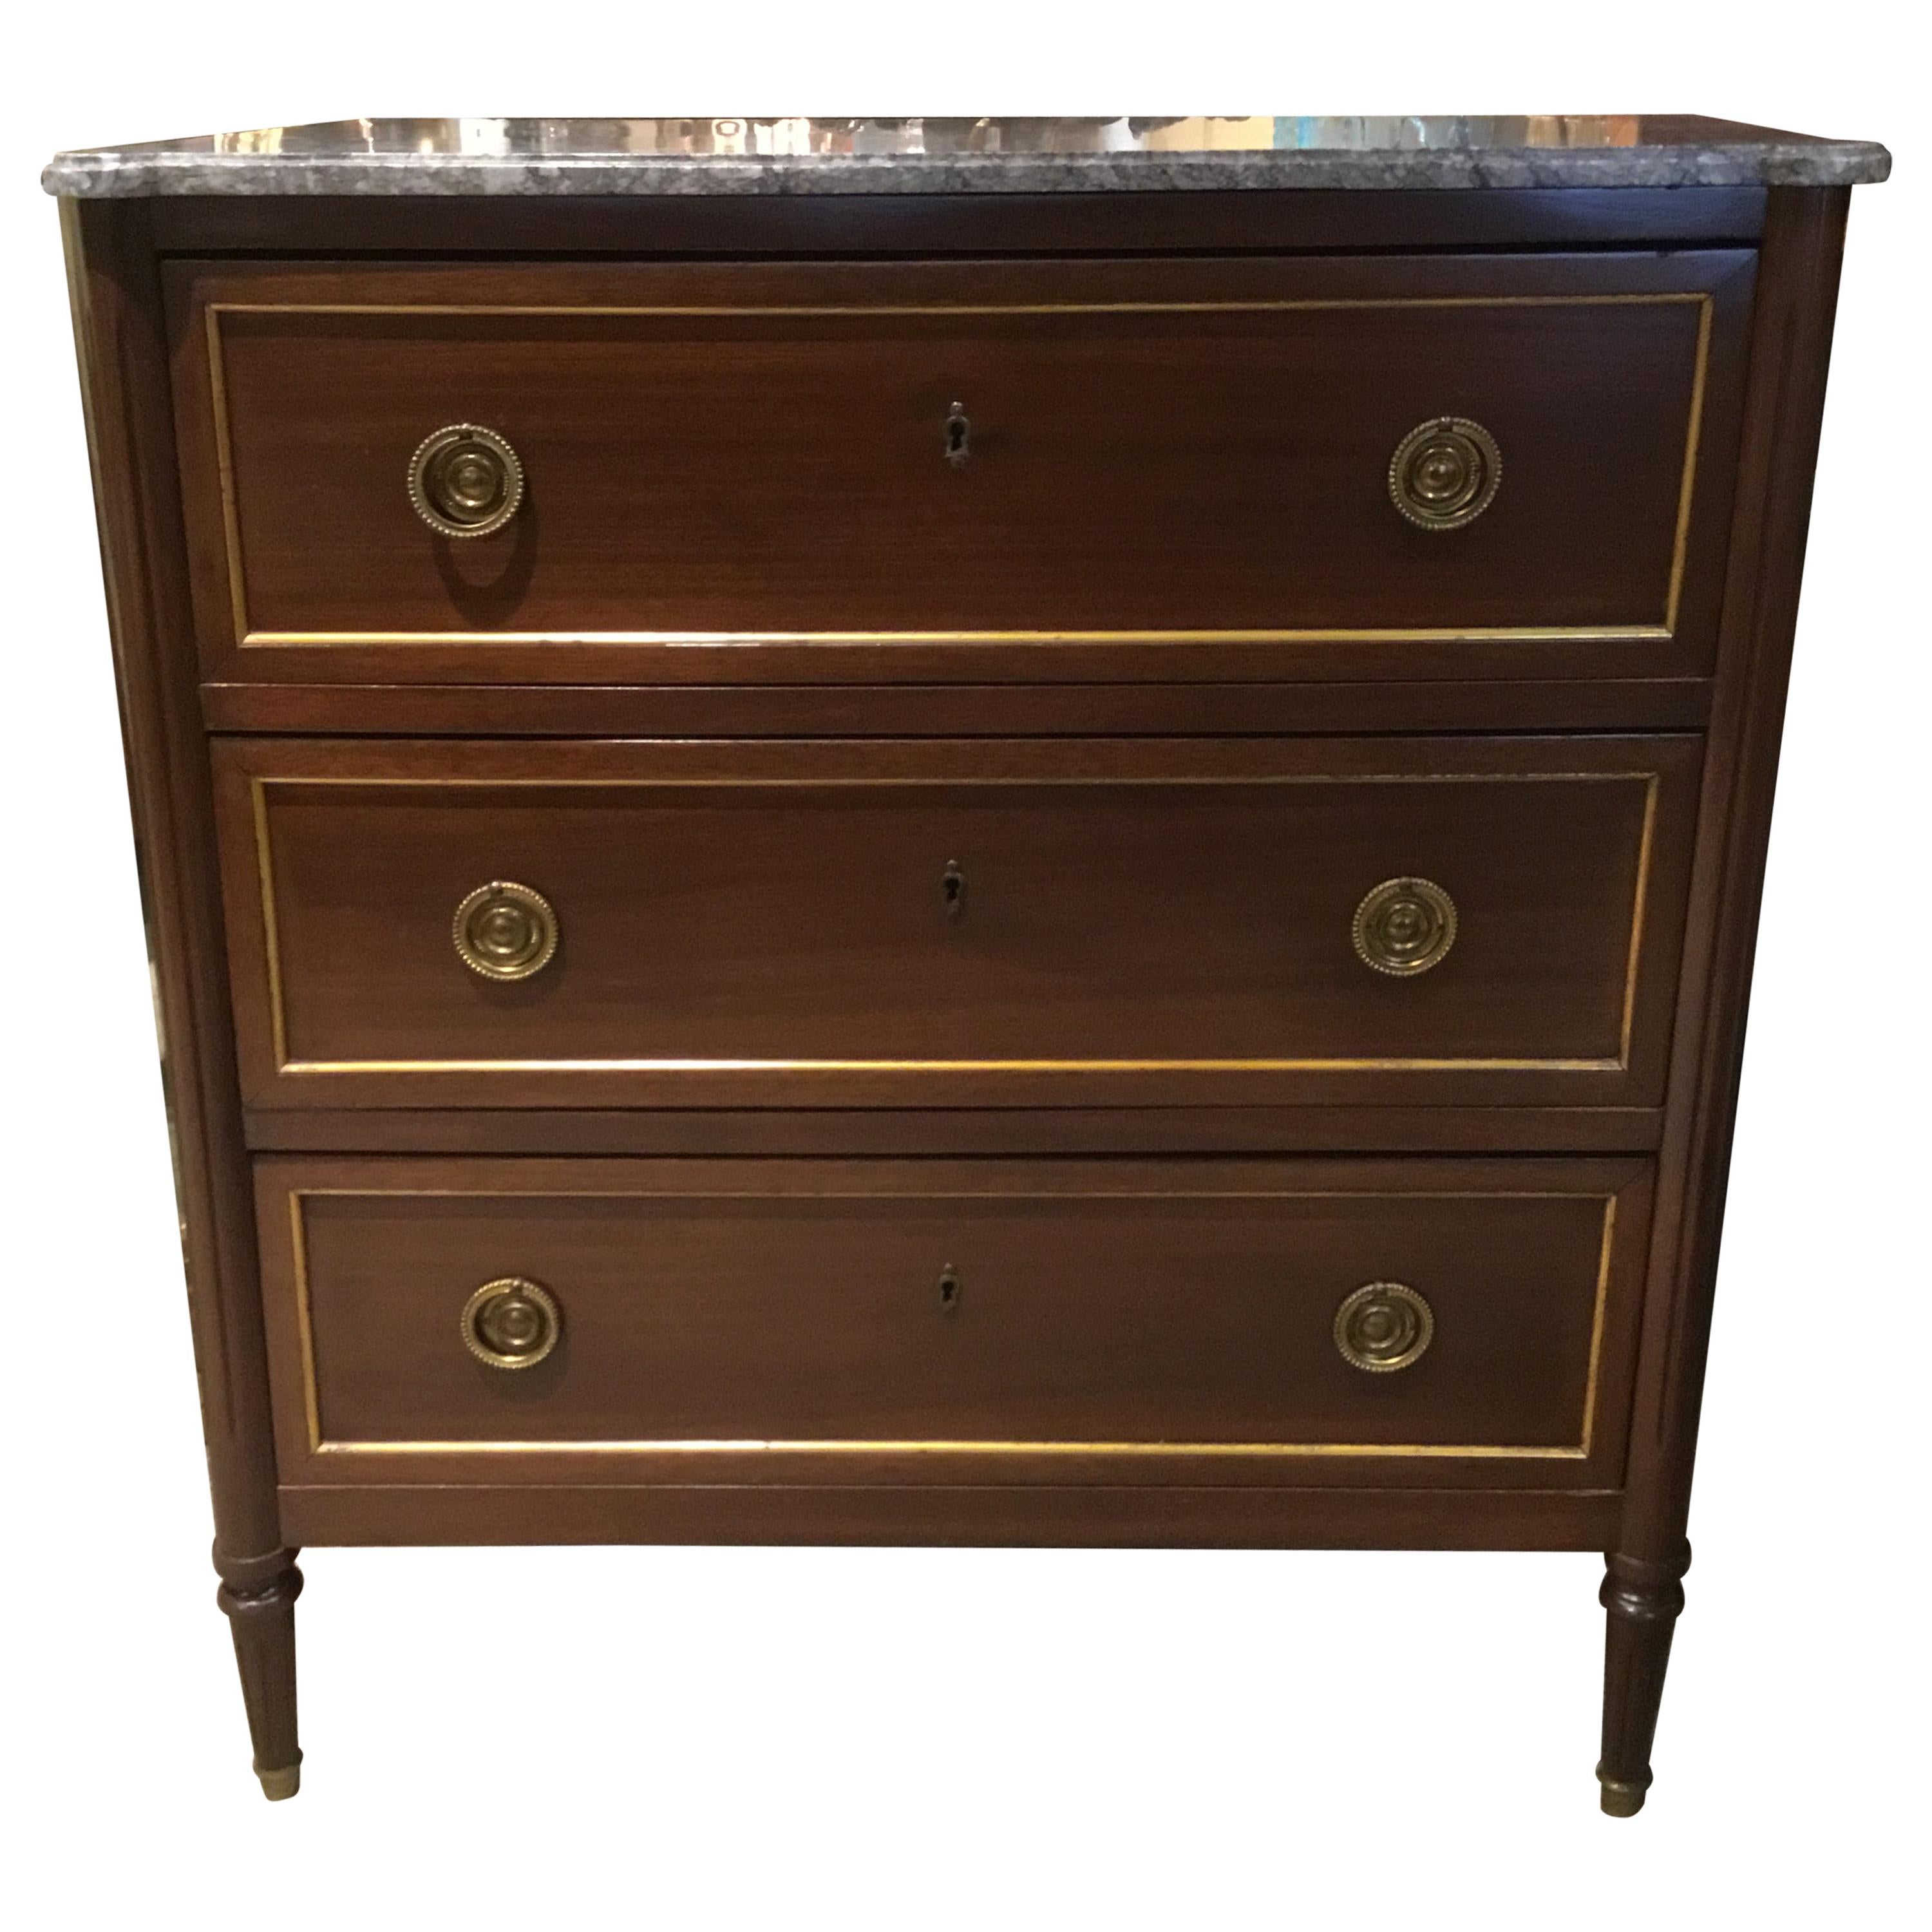 Louis XVI Style Chest of Drawers with Gray Marble Top and Three Drawers